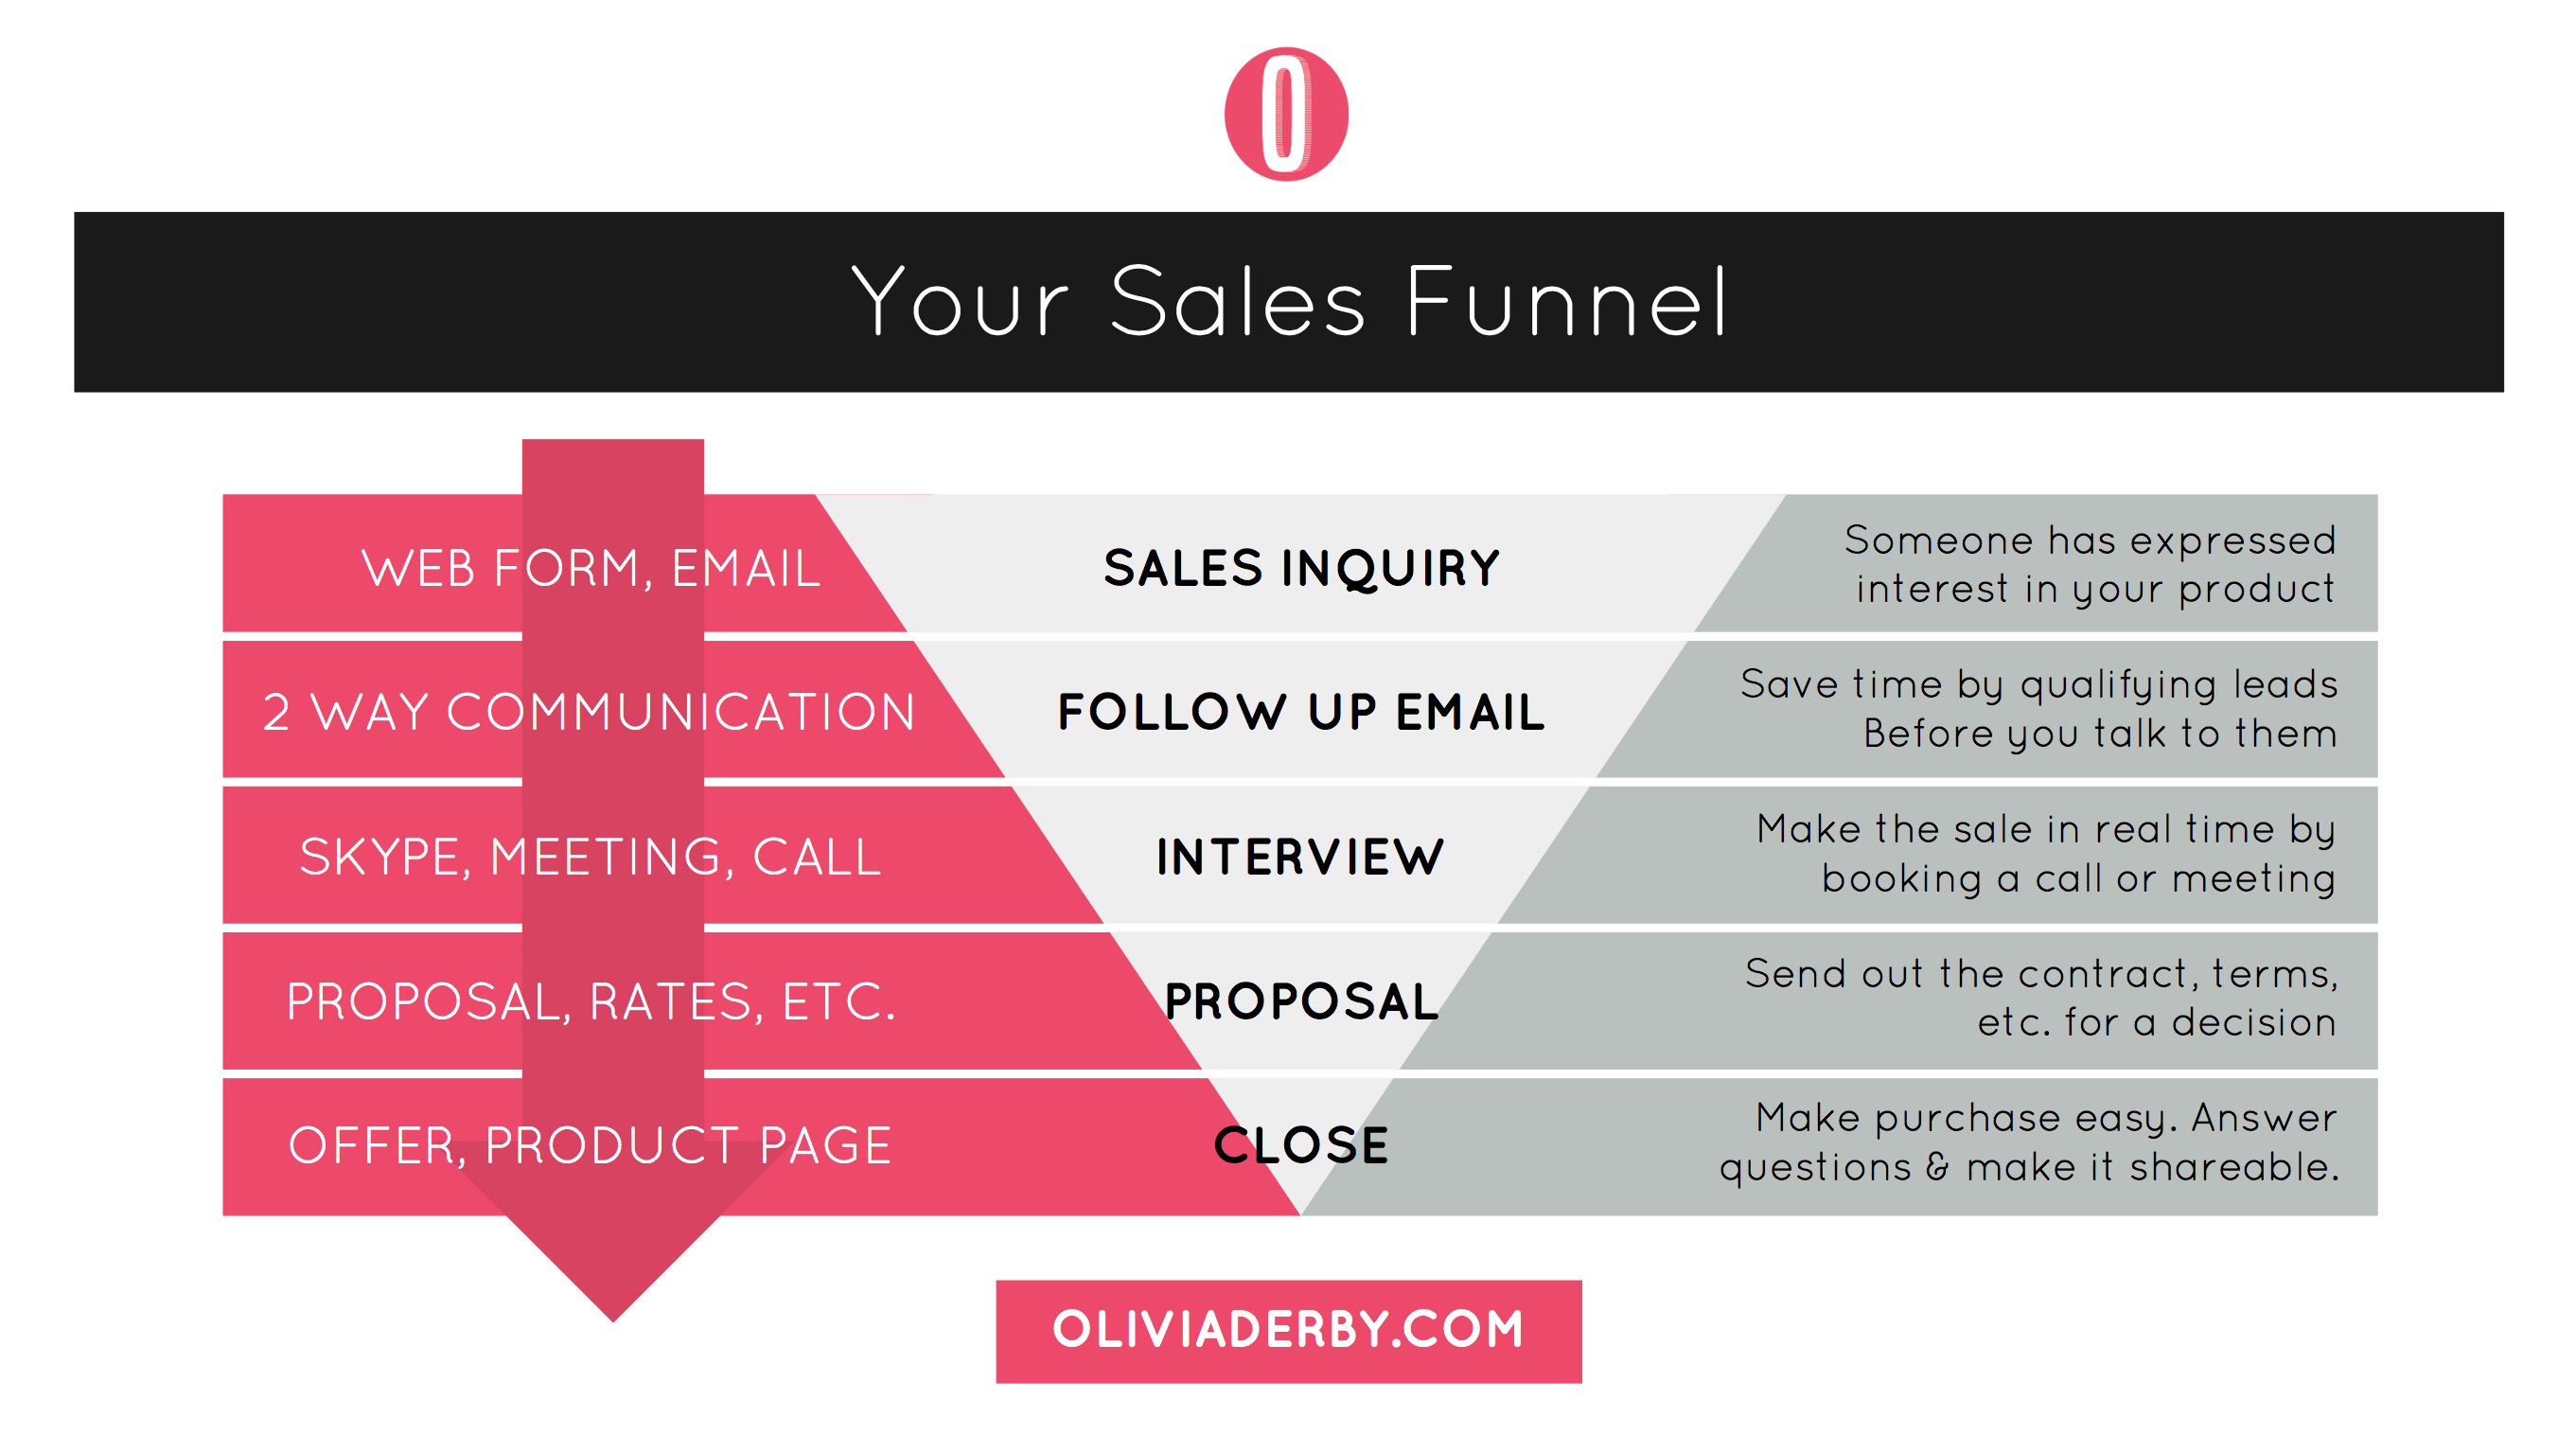 Convert & Close Stages of a Sales Funnel